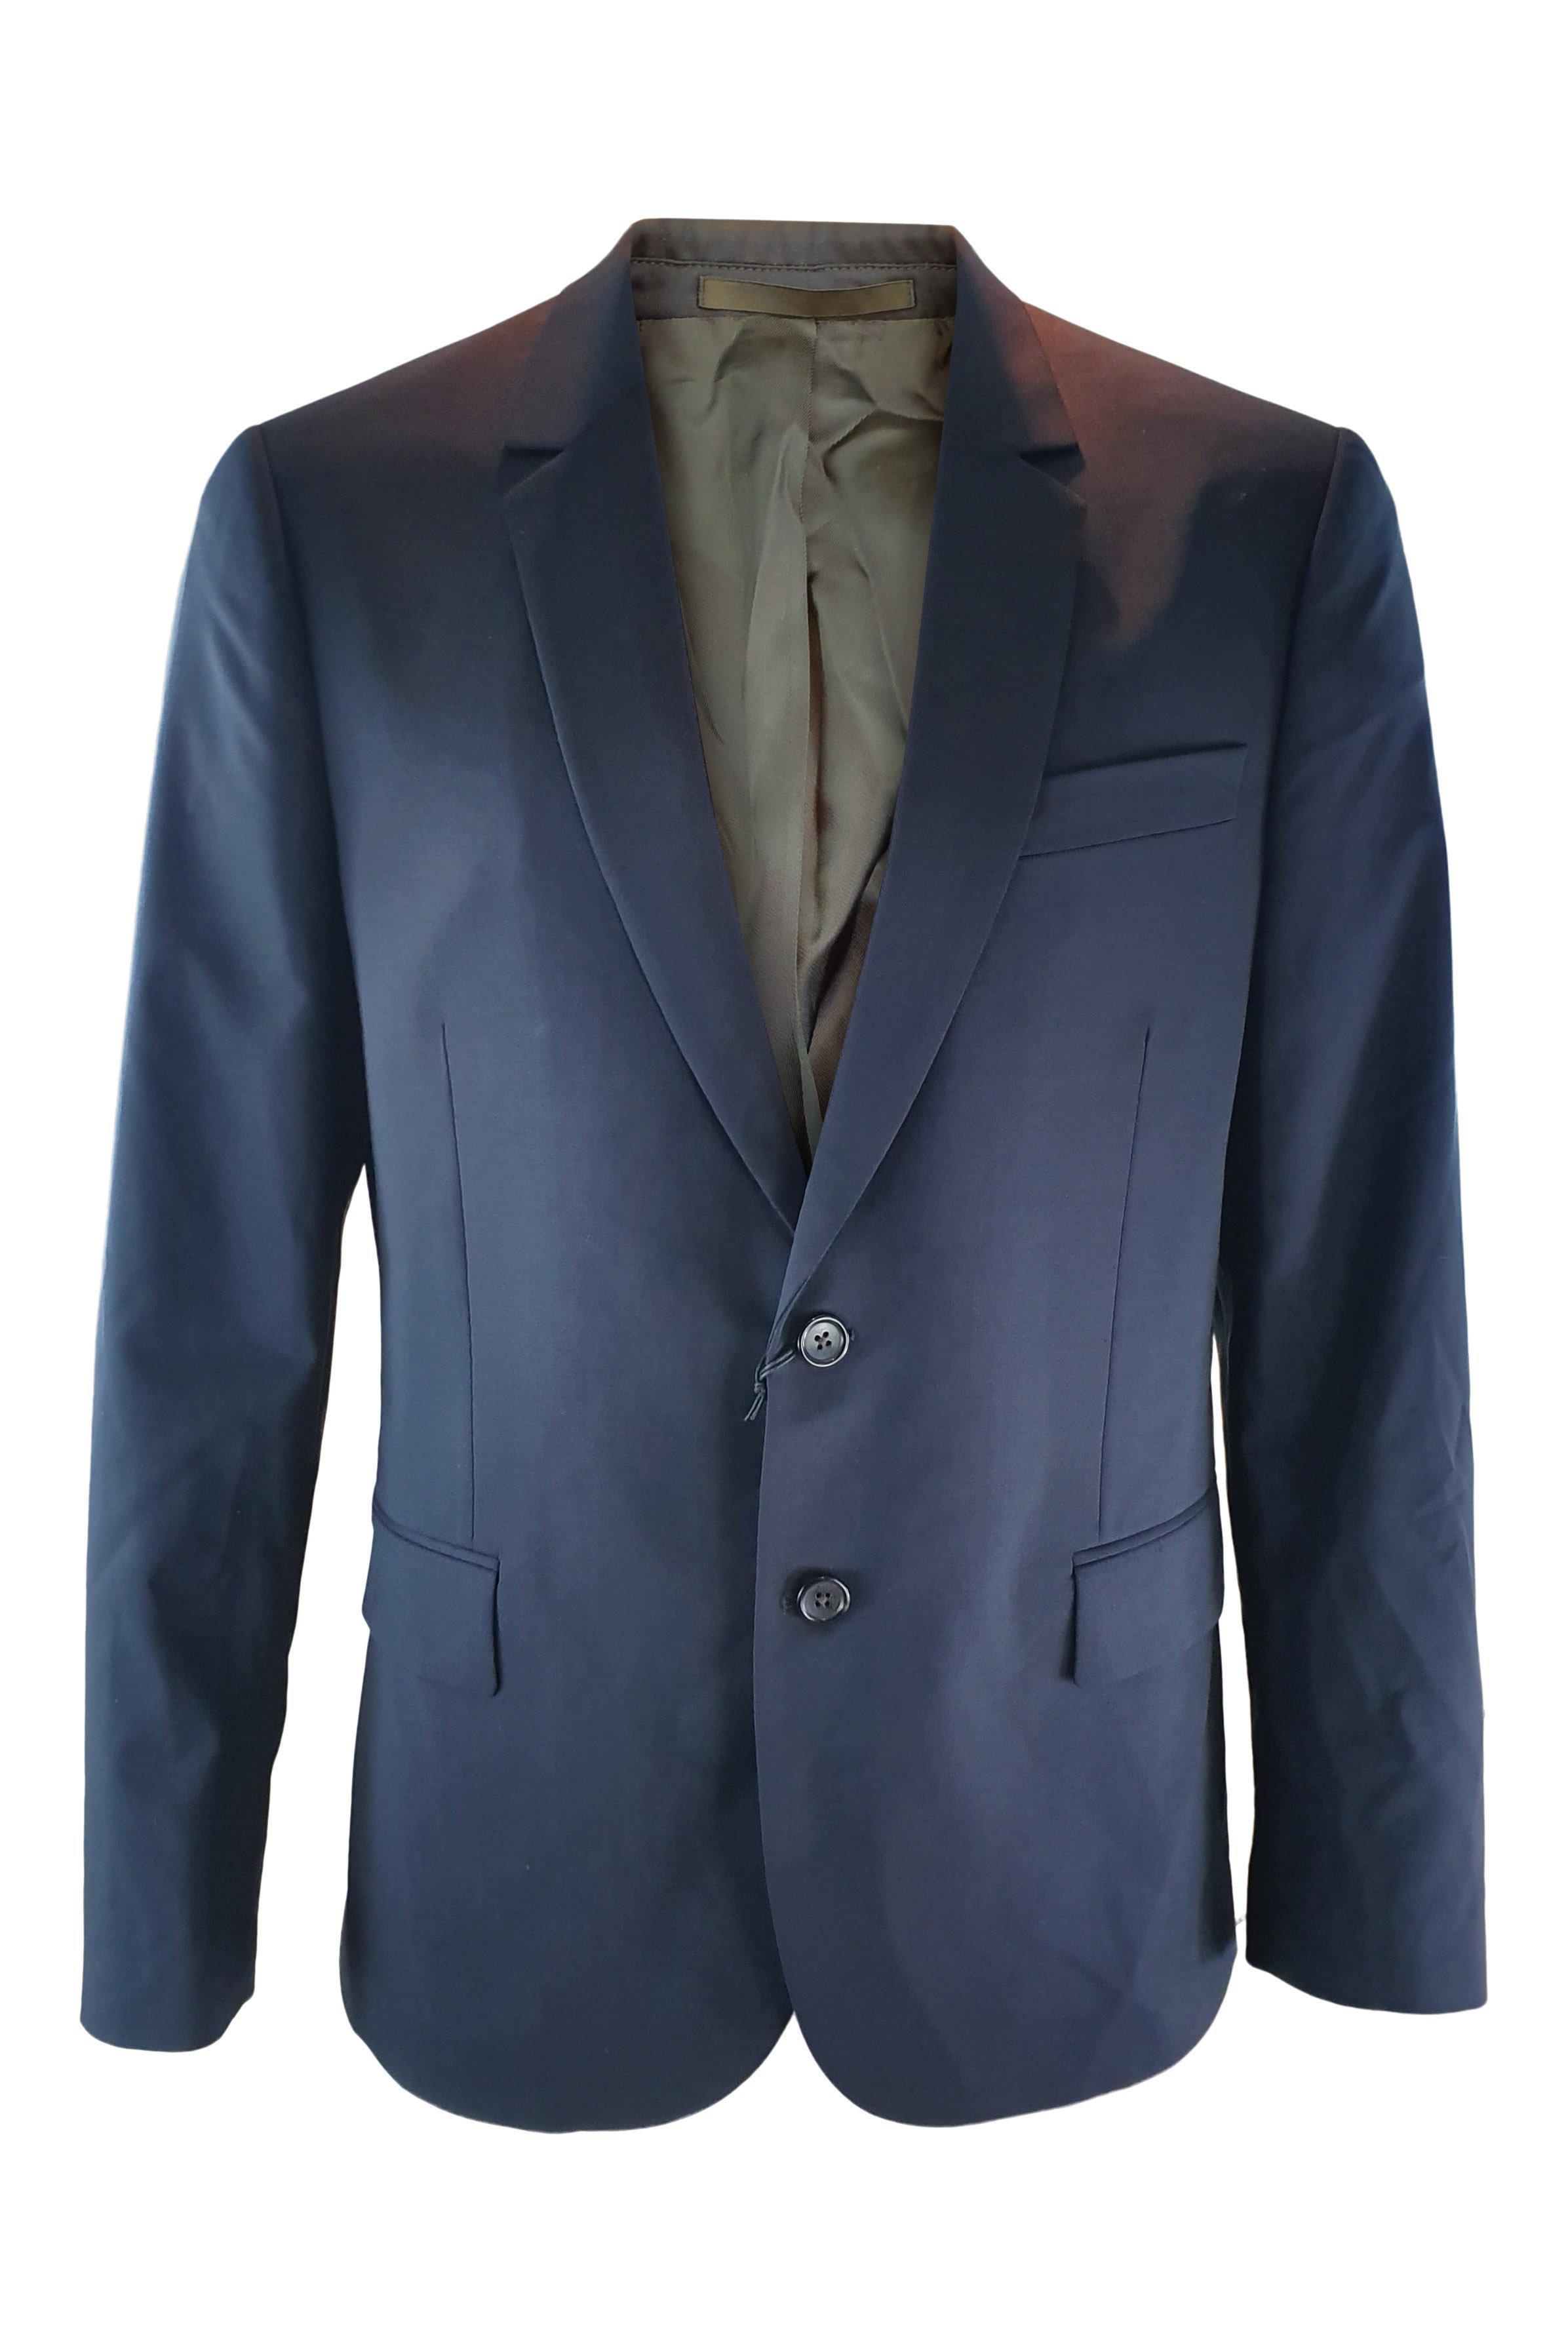 PAUL SMITH Blue Black Wool Blend Single Breasted Blazer Jacket (40:50)-Paul Smith-The Freperie